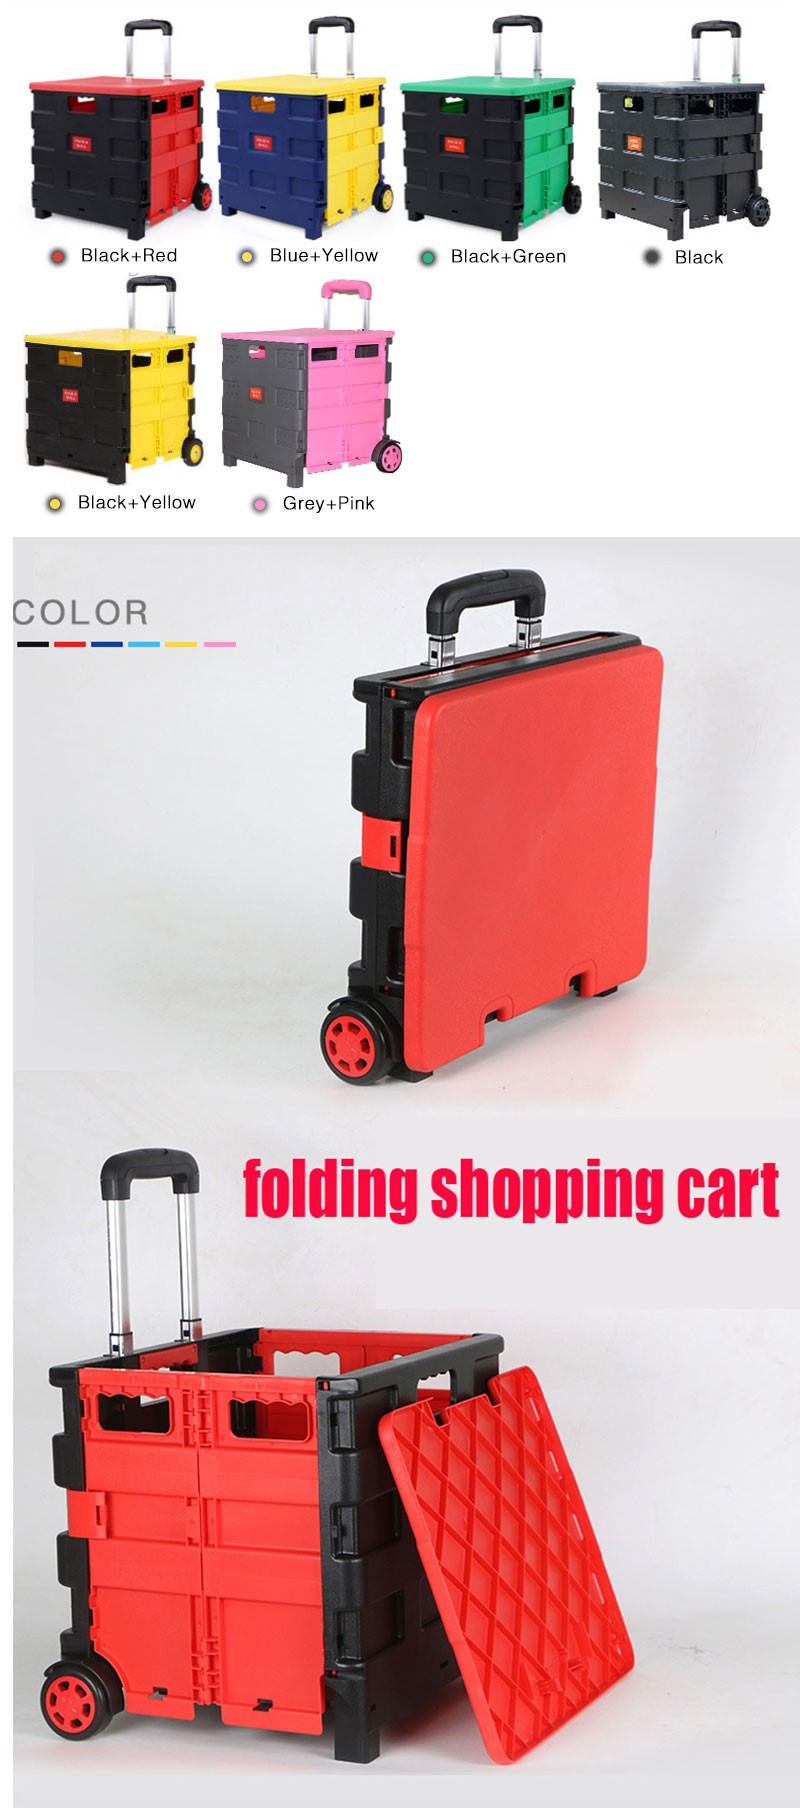 Wholesale Supermarket Folding Fabric Climb Stairs Shopping Cart With Seat